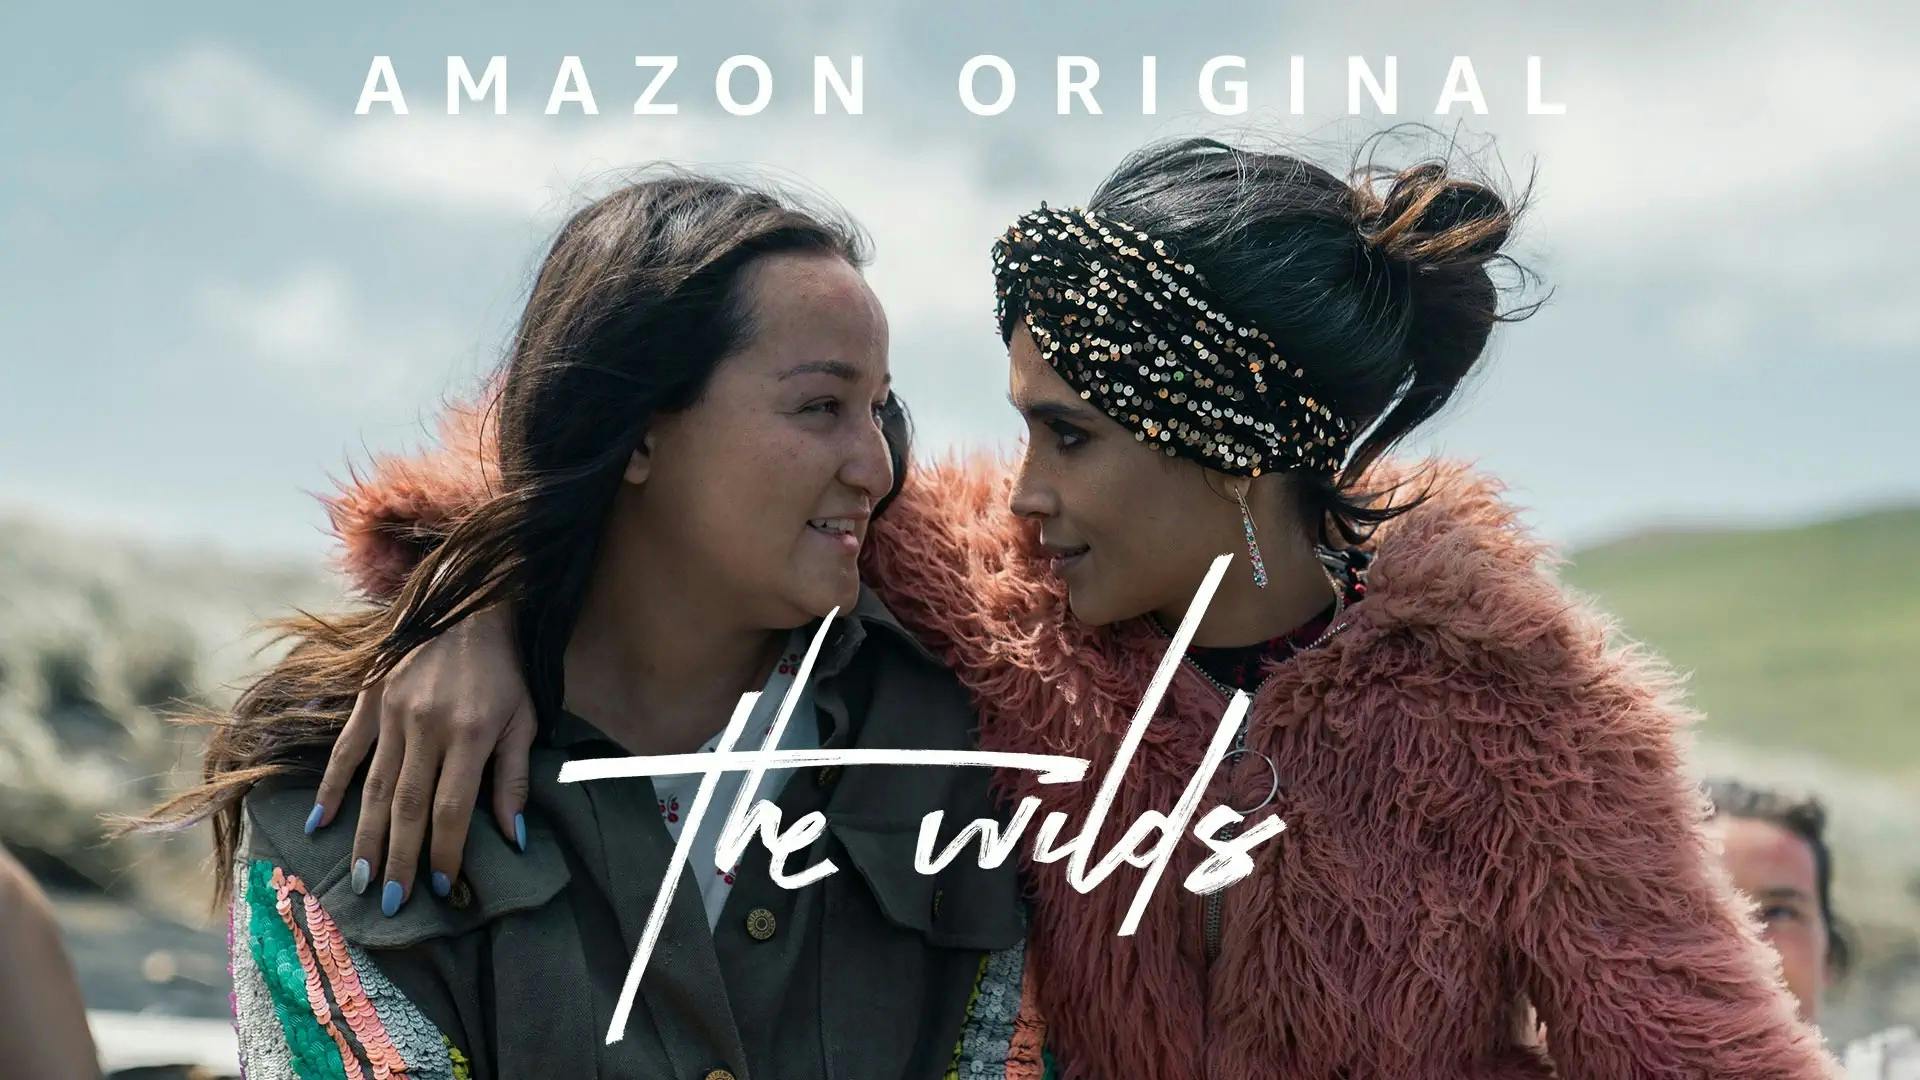 The thumbnail cover for the tv show The Wilds